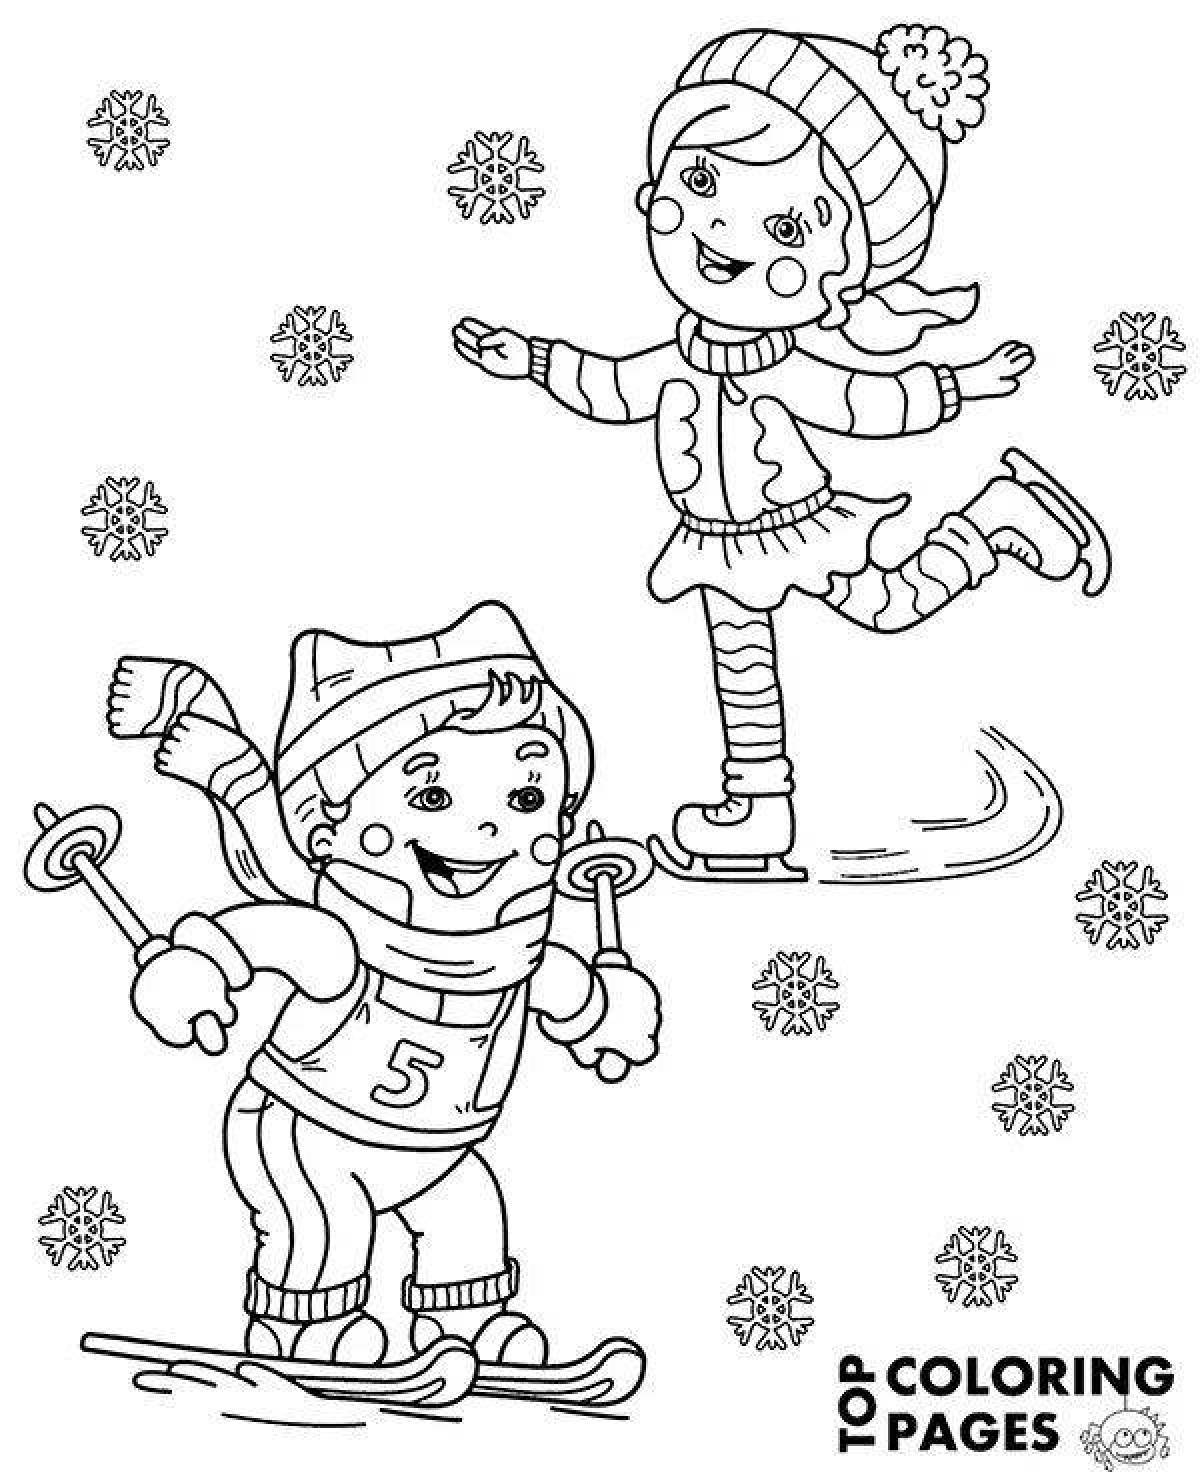 A fun winter sports coloring book for kids